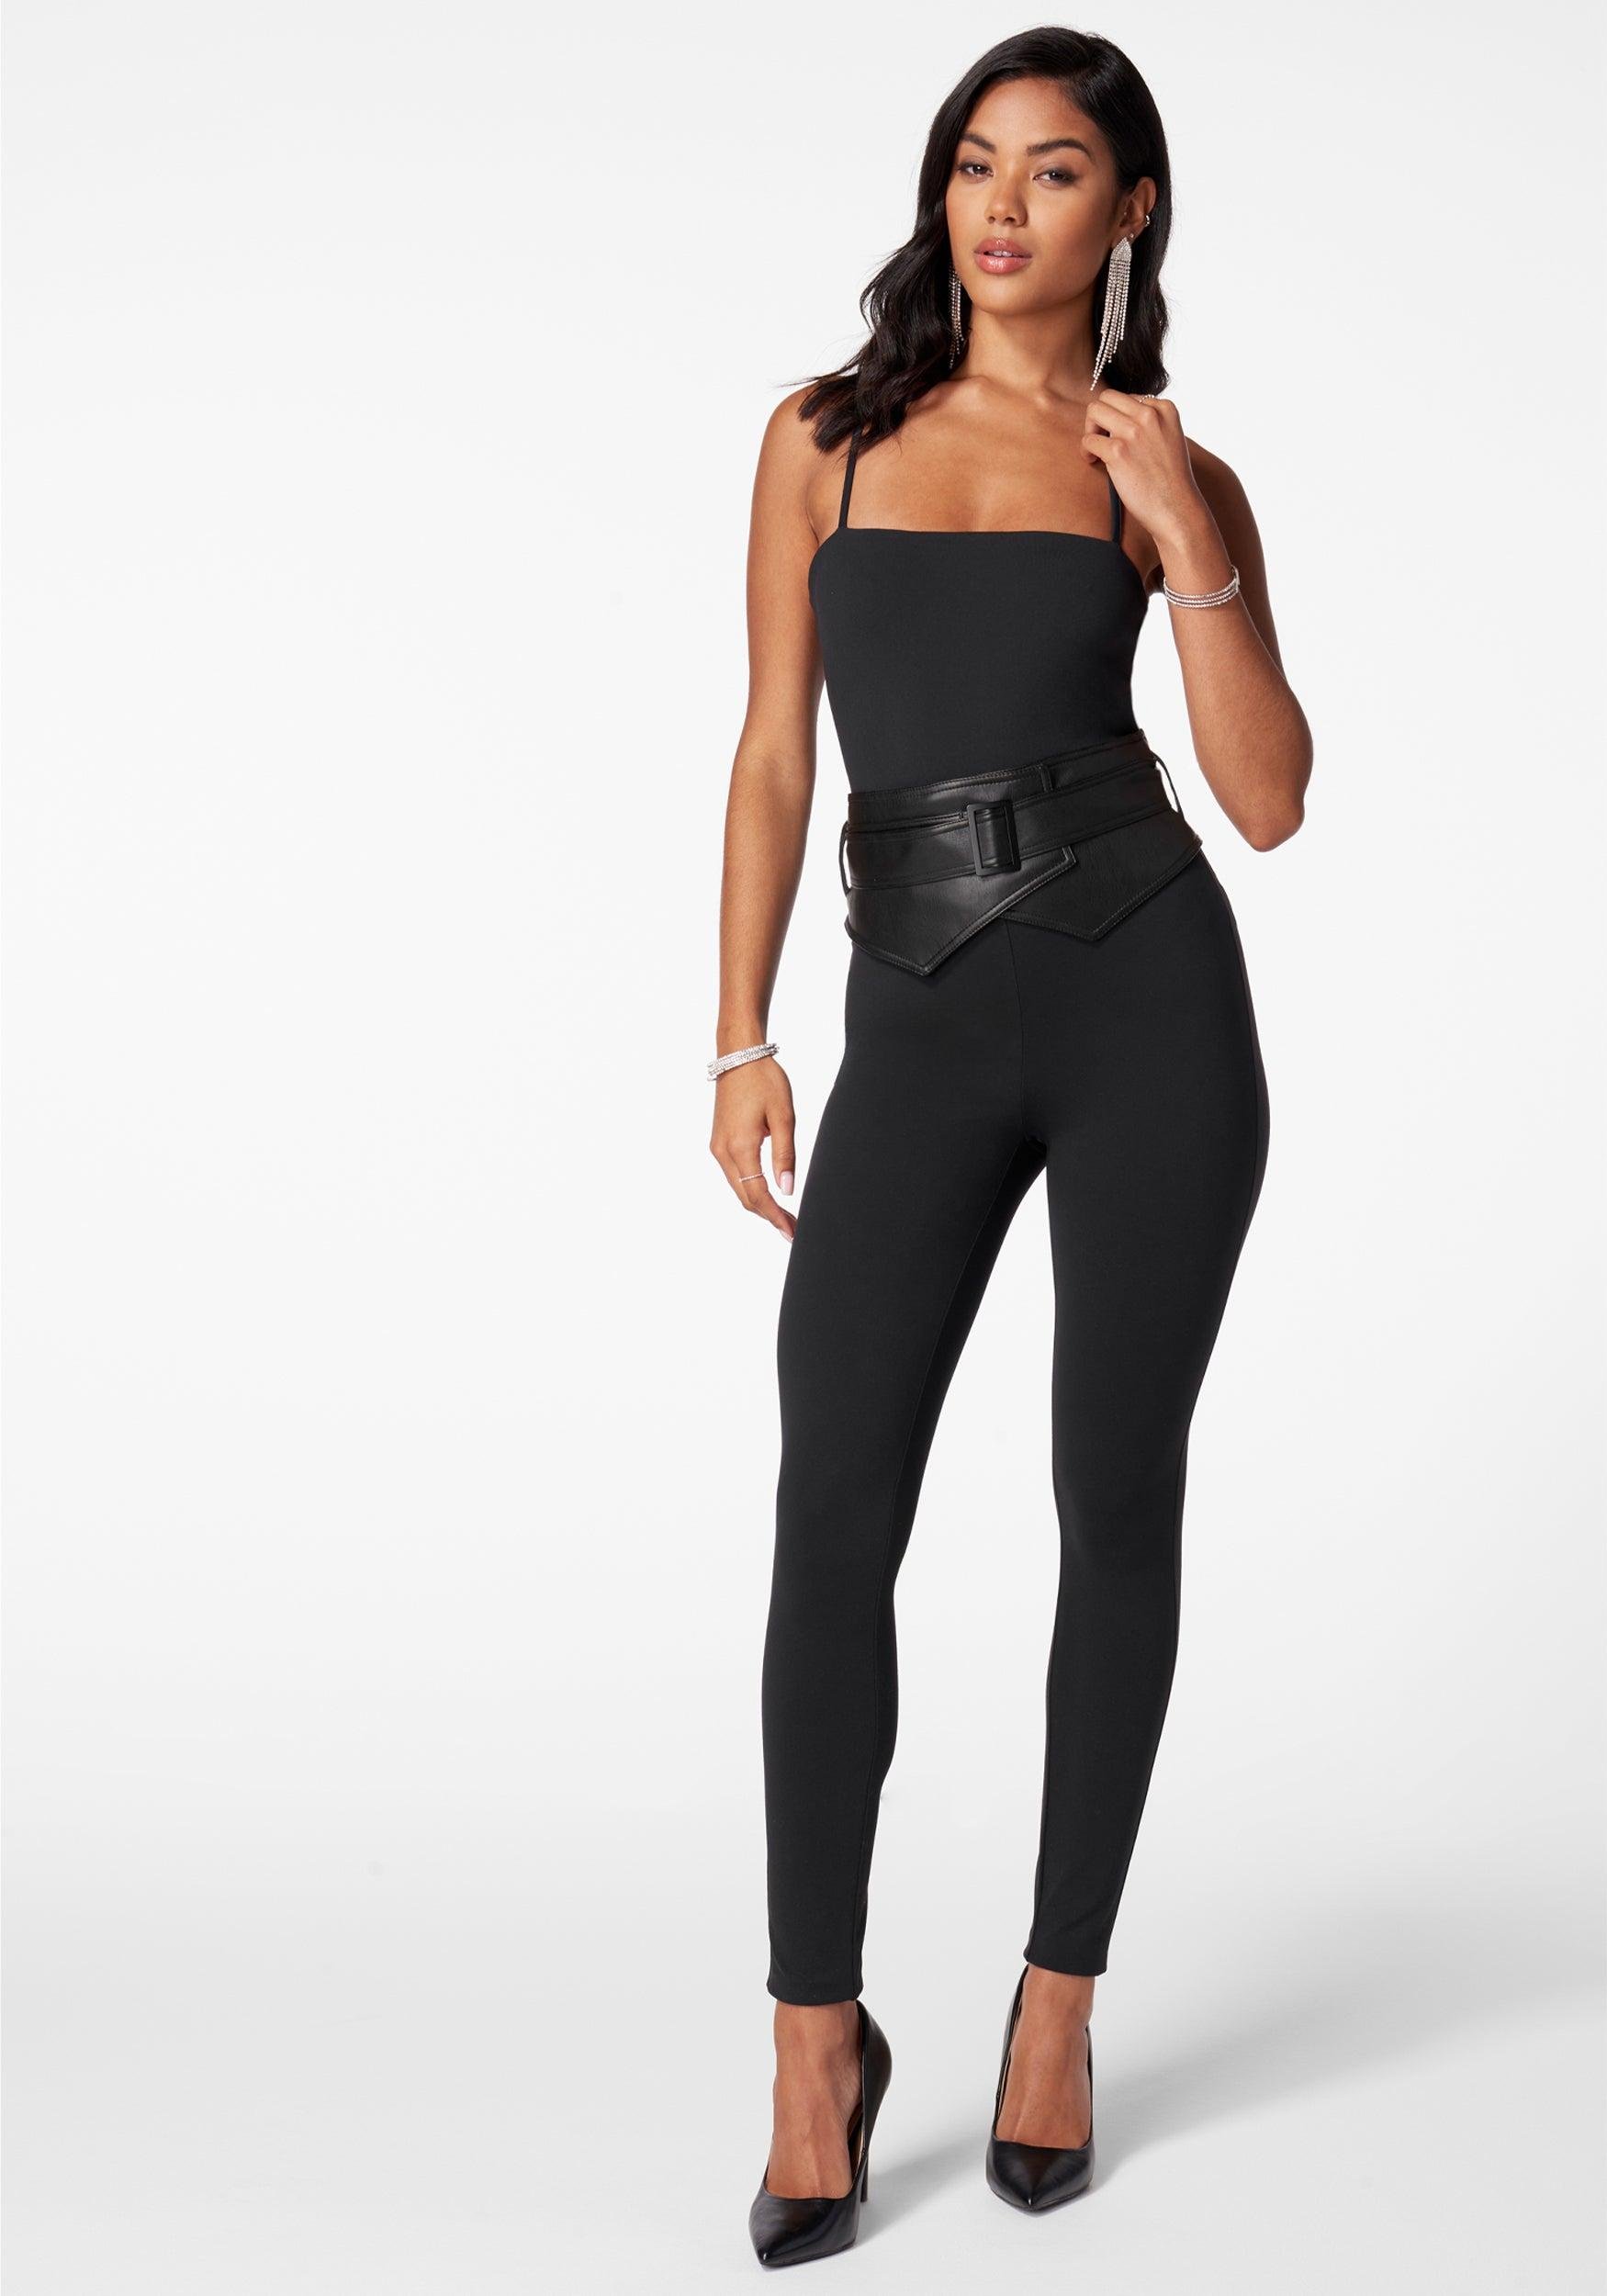 Removable Vegan Leather Belt Catsuit by BEBE